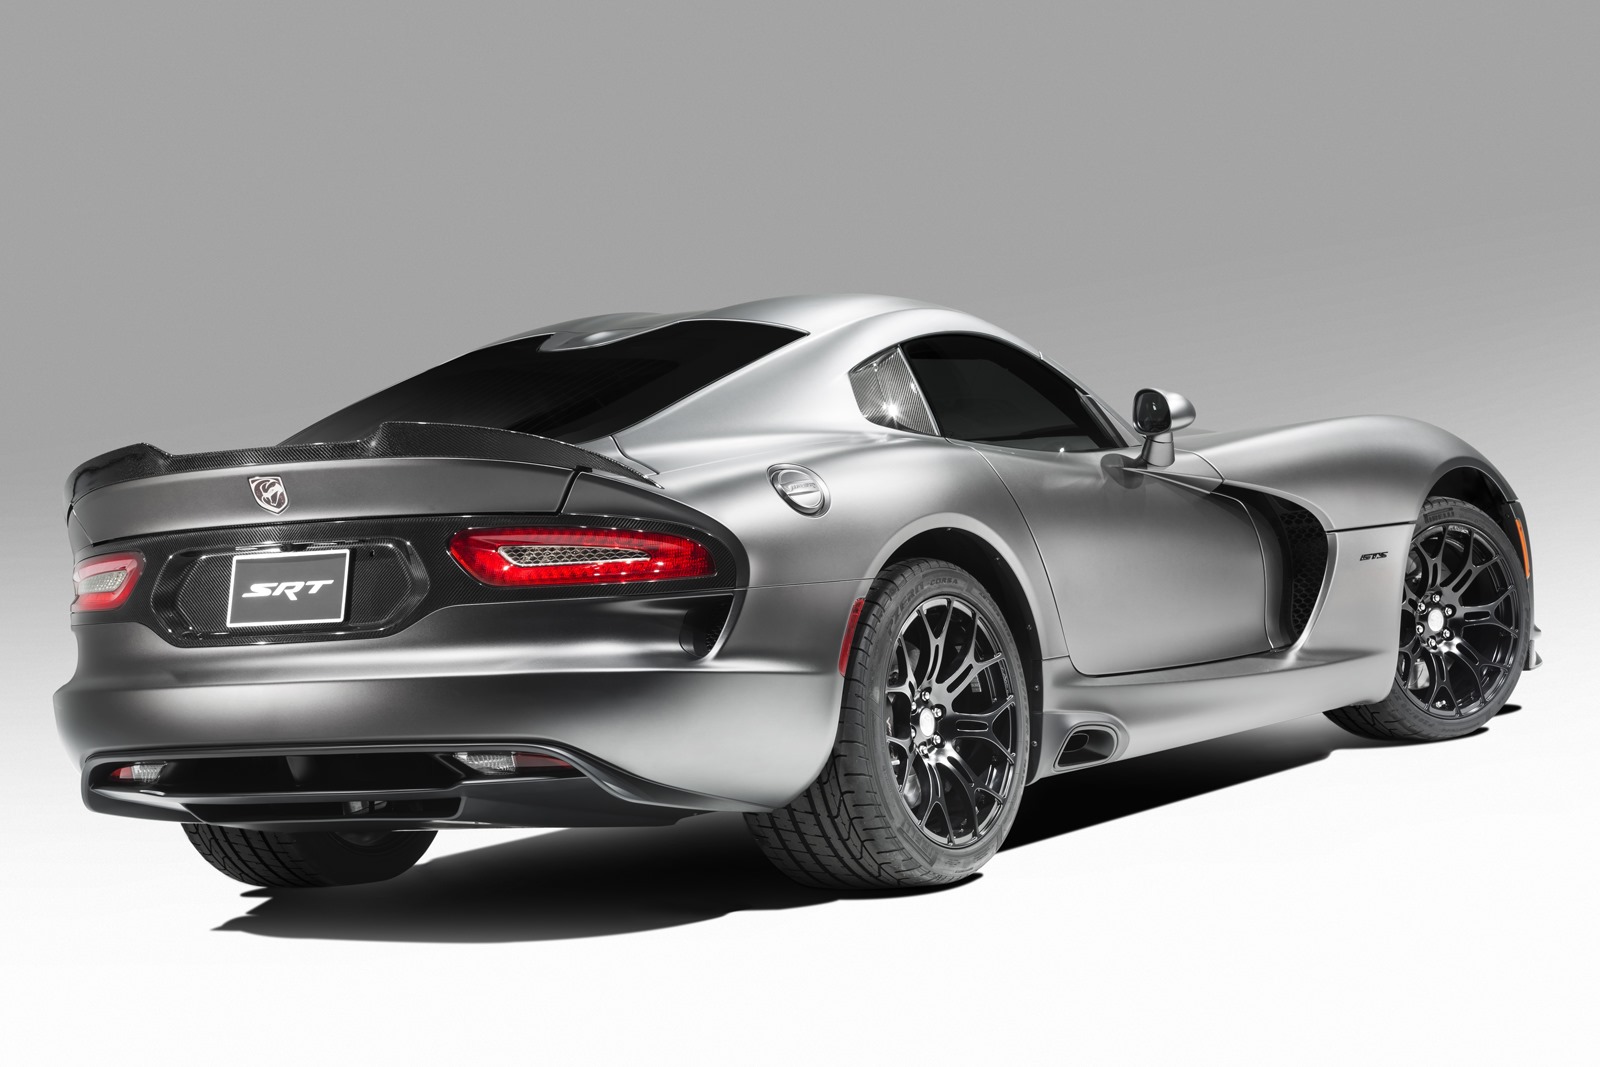 2012 - [Dodge] Viper SRT  - Page 10 SRT-Viper-Anodized-Carbon-Special-Edition-with-Time-Attack-Group-2%25255B4%25255D